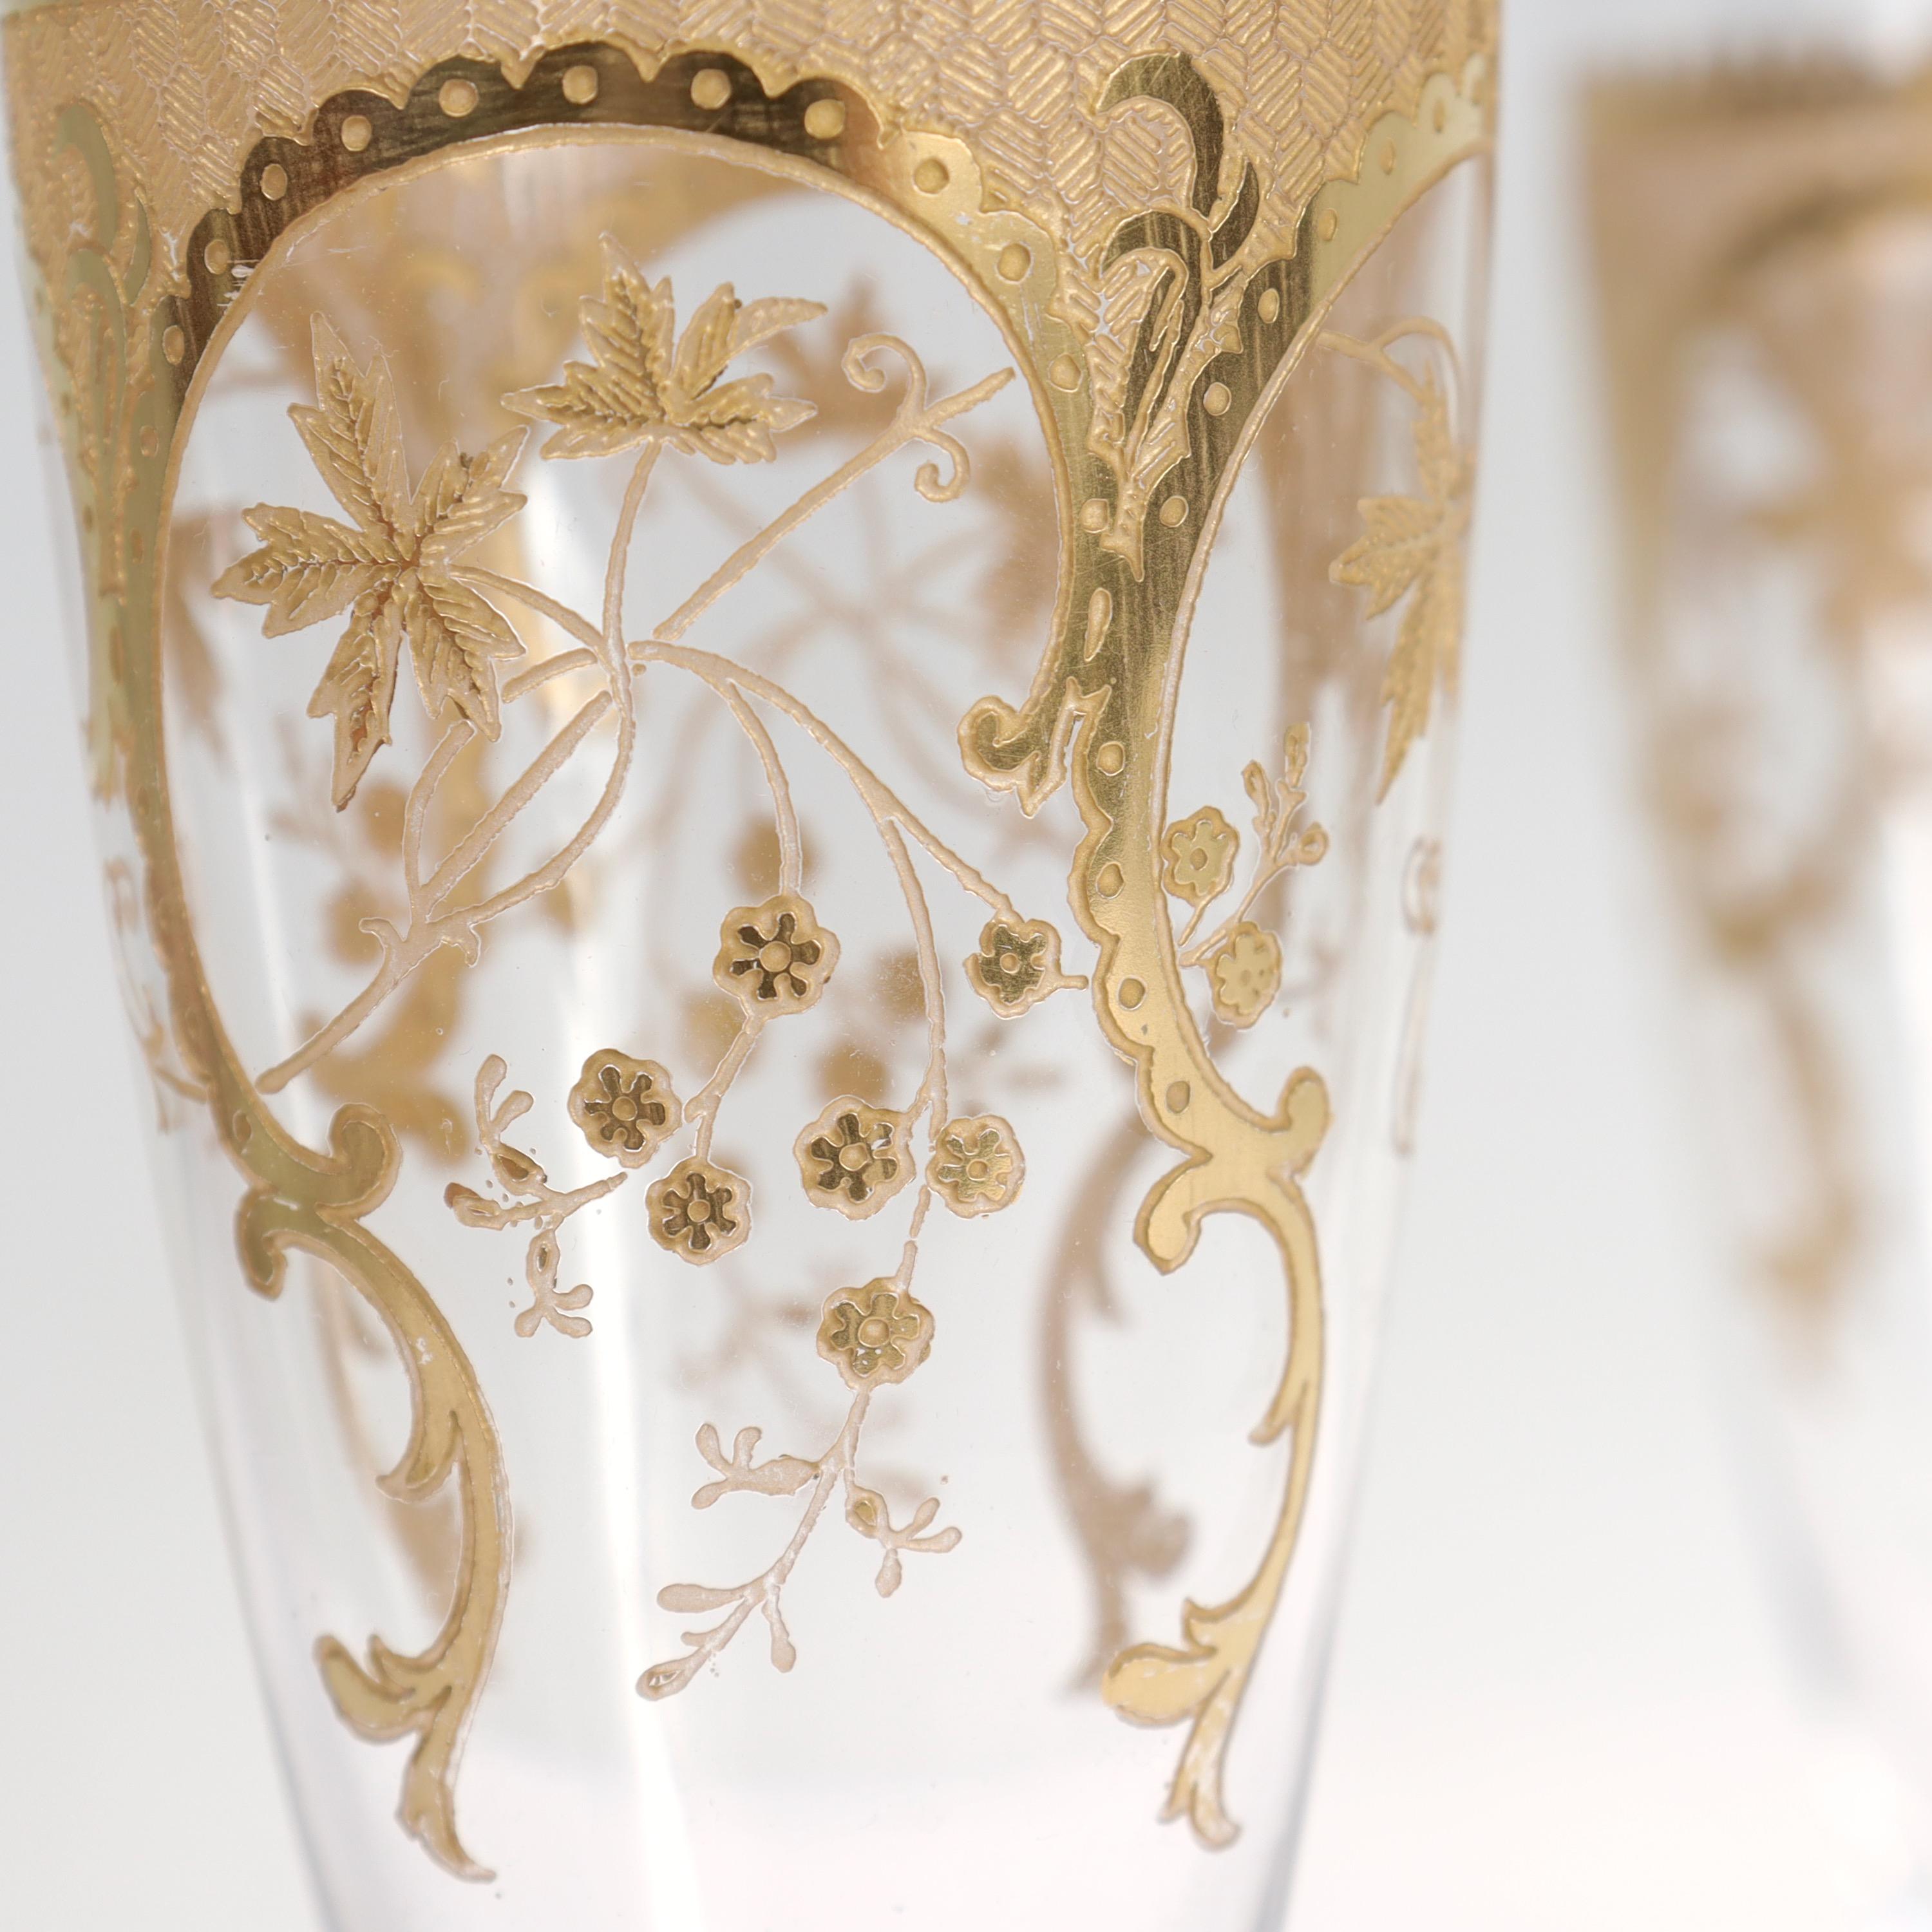 Pair of Richly Gilt Antique Etched & Cut Glass Champagne Stems or Flutes  4